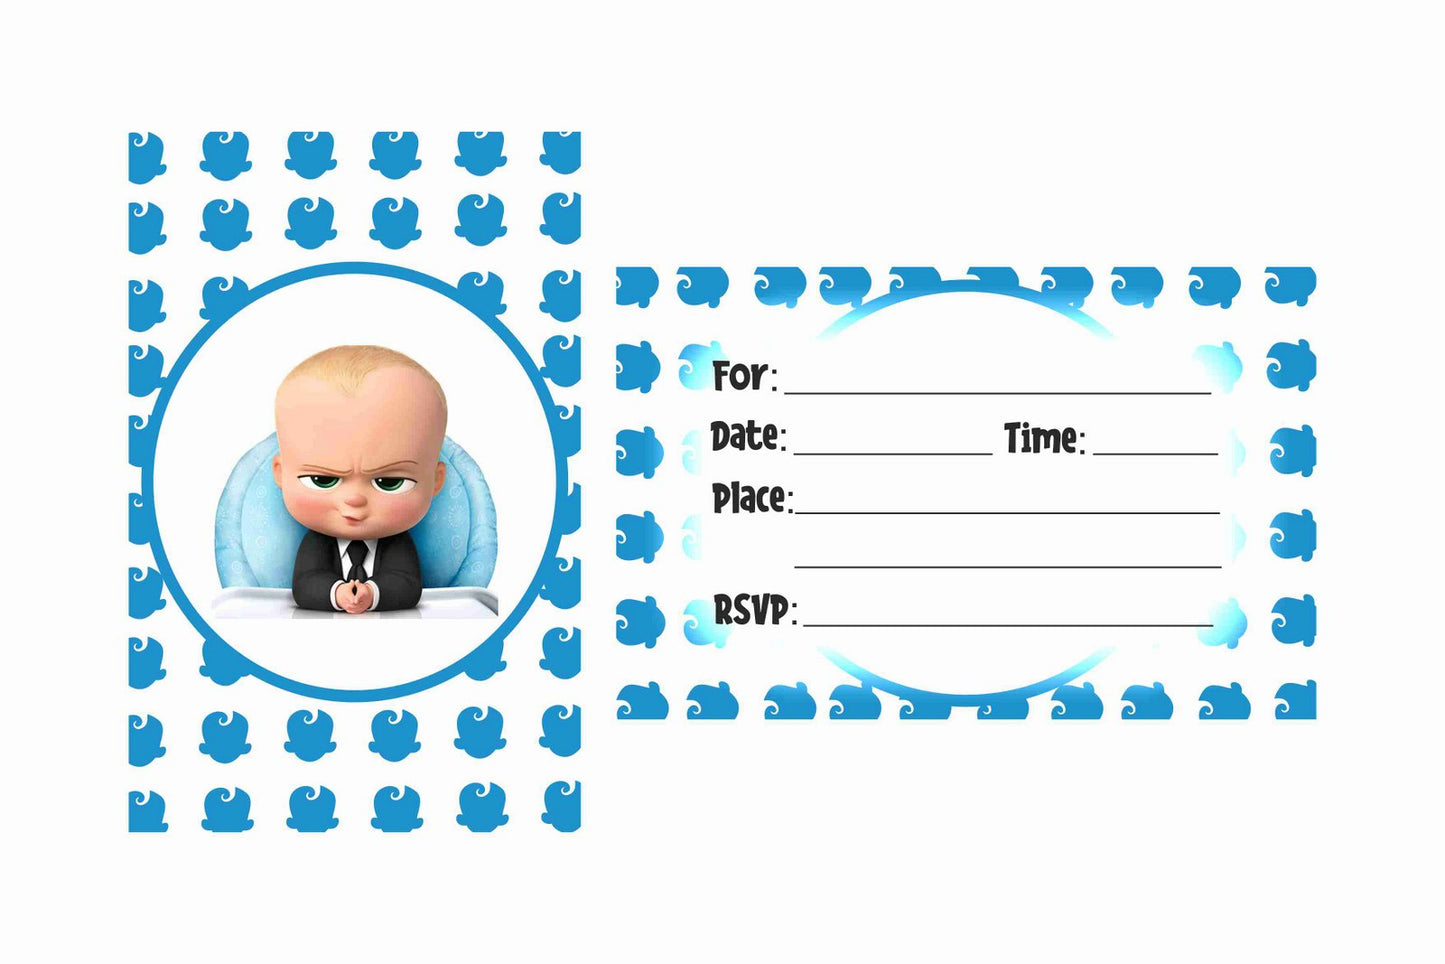 Boss Baby Theme Children's Birthday Party Invitations Cards with Envelopes - Kids Birthday Party Invitations for Boys or Girls,- Invitation Cards (Pack of 10)